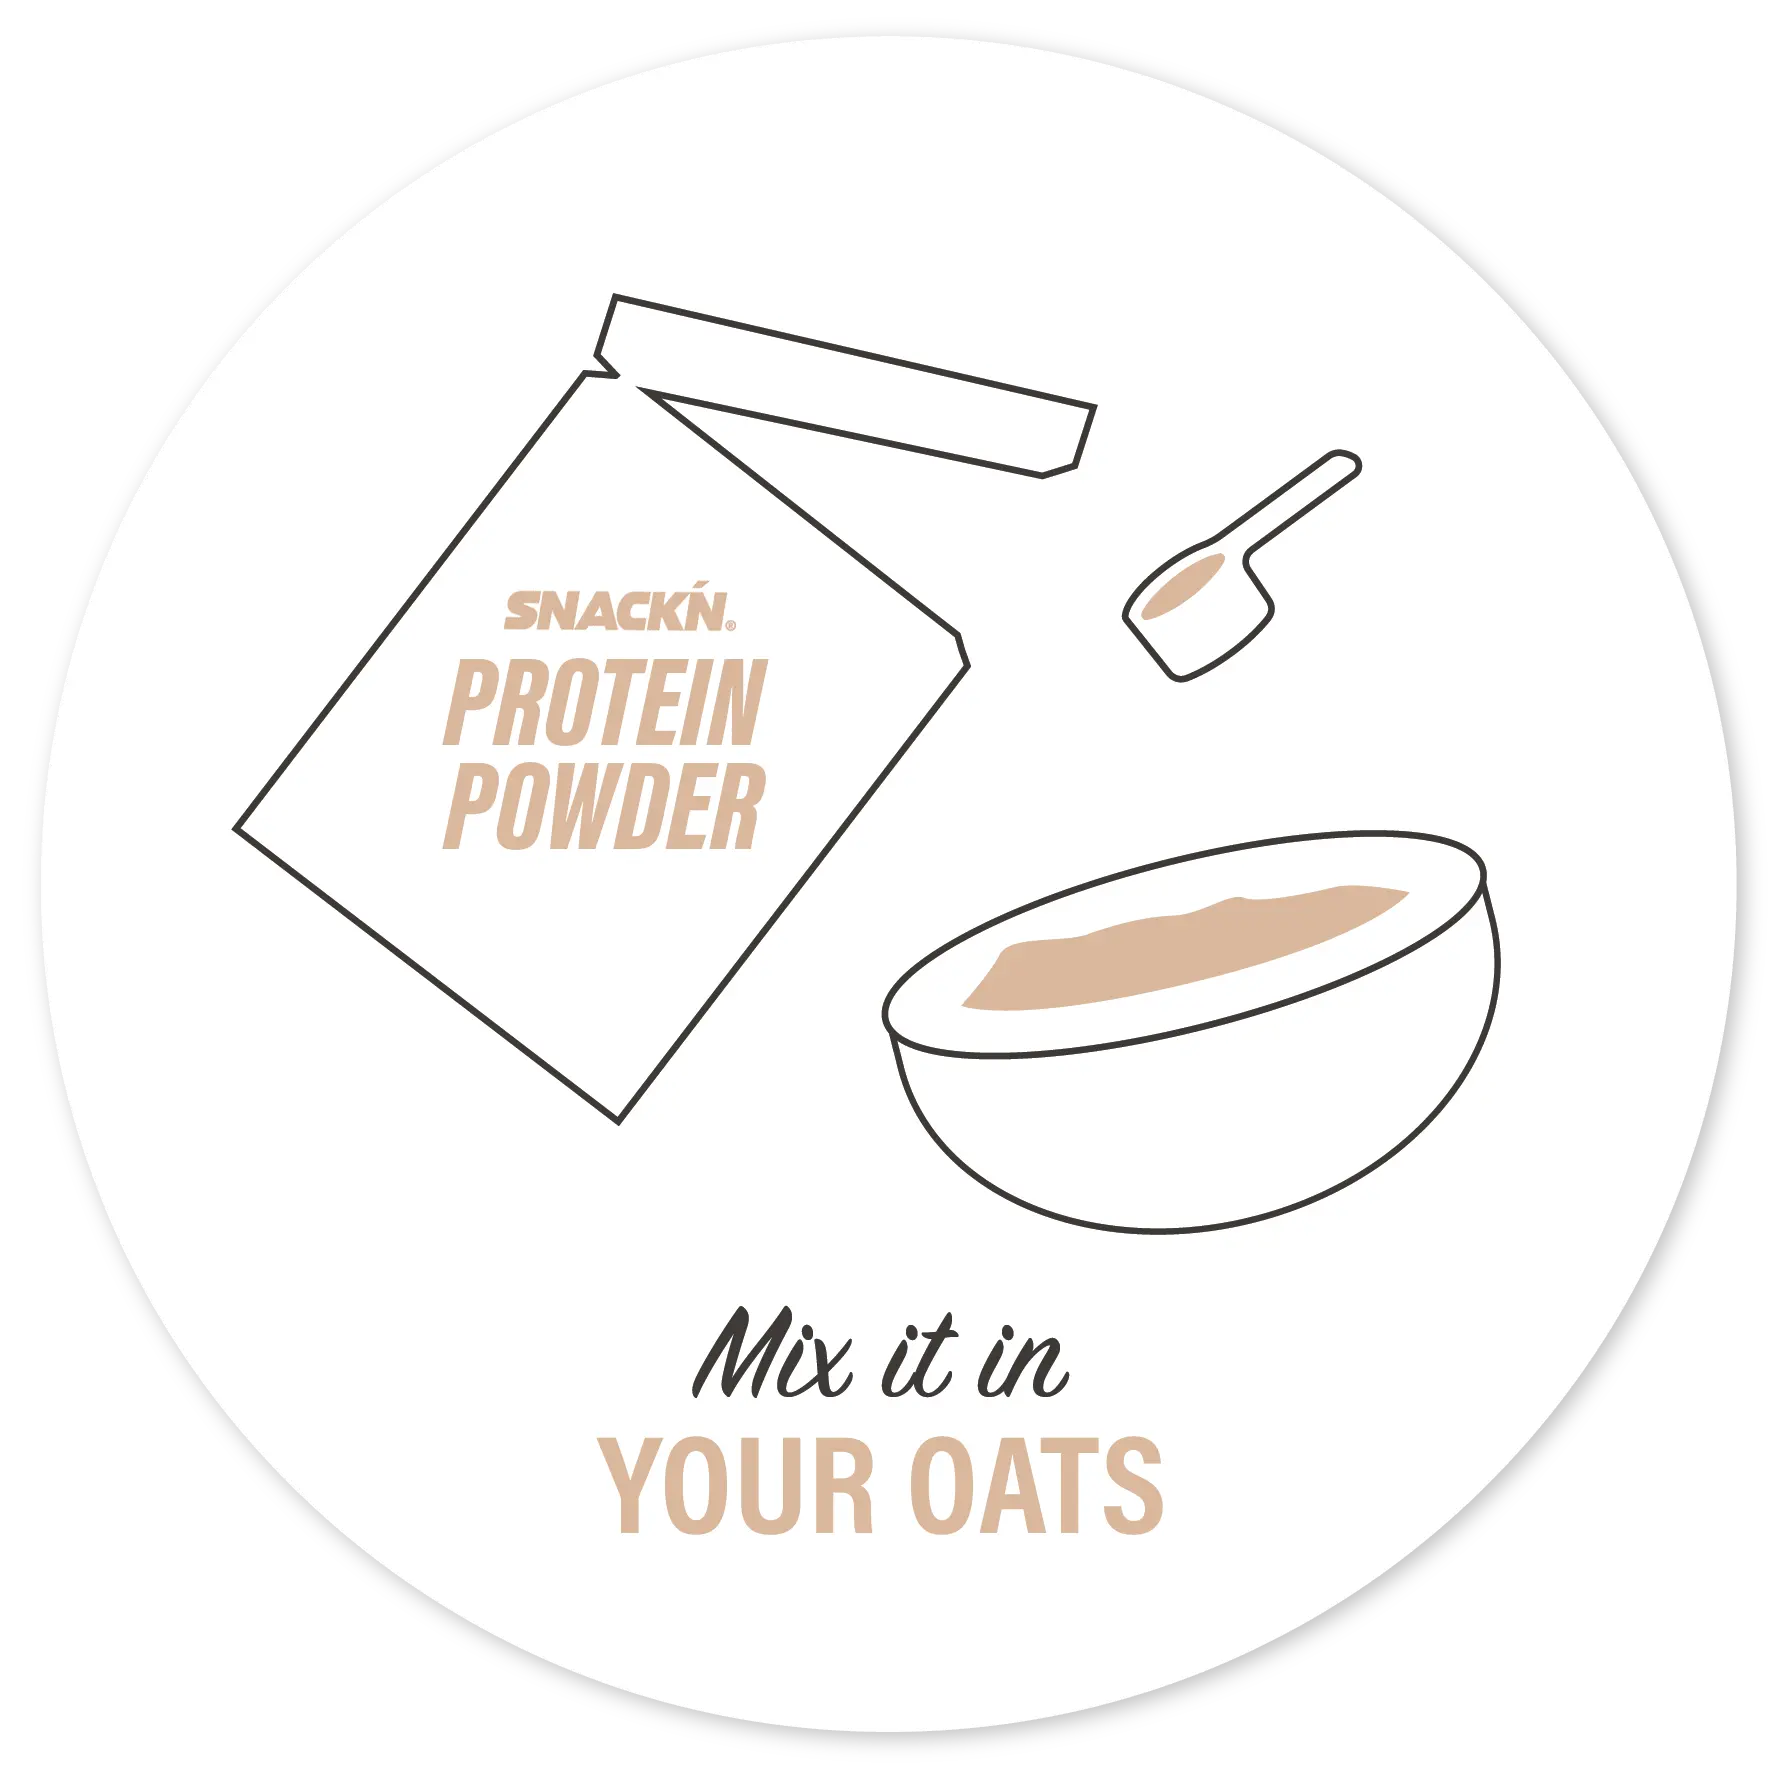 Mix protein in your oats